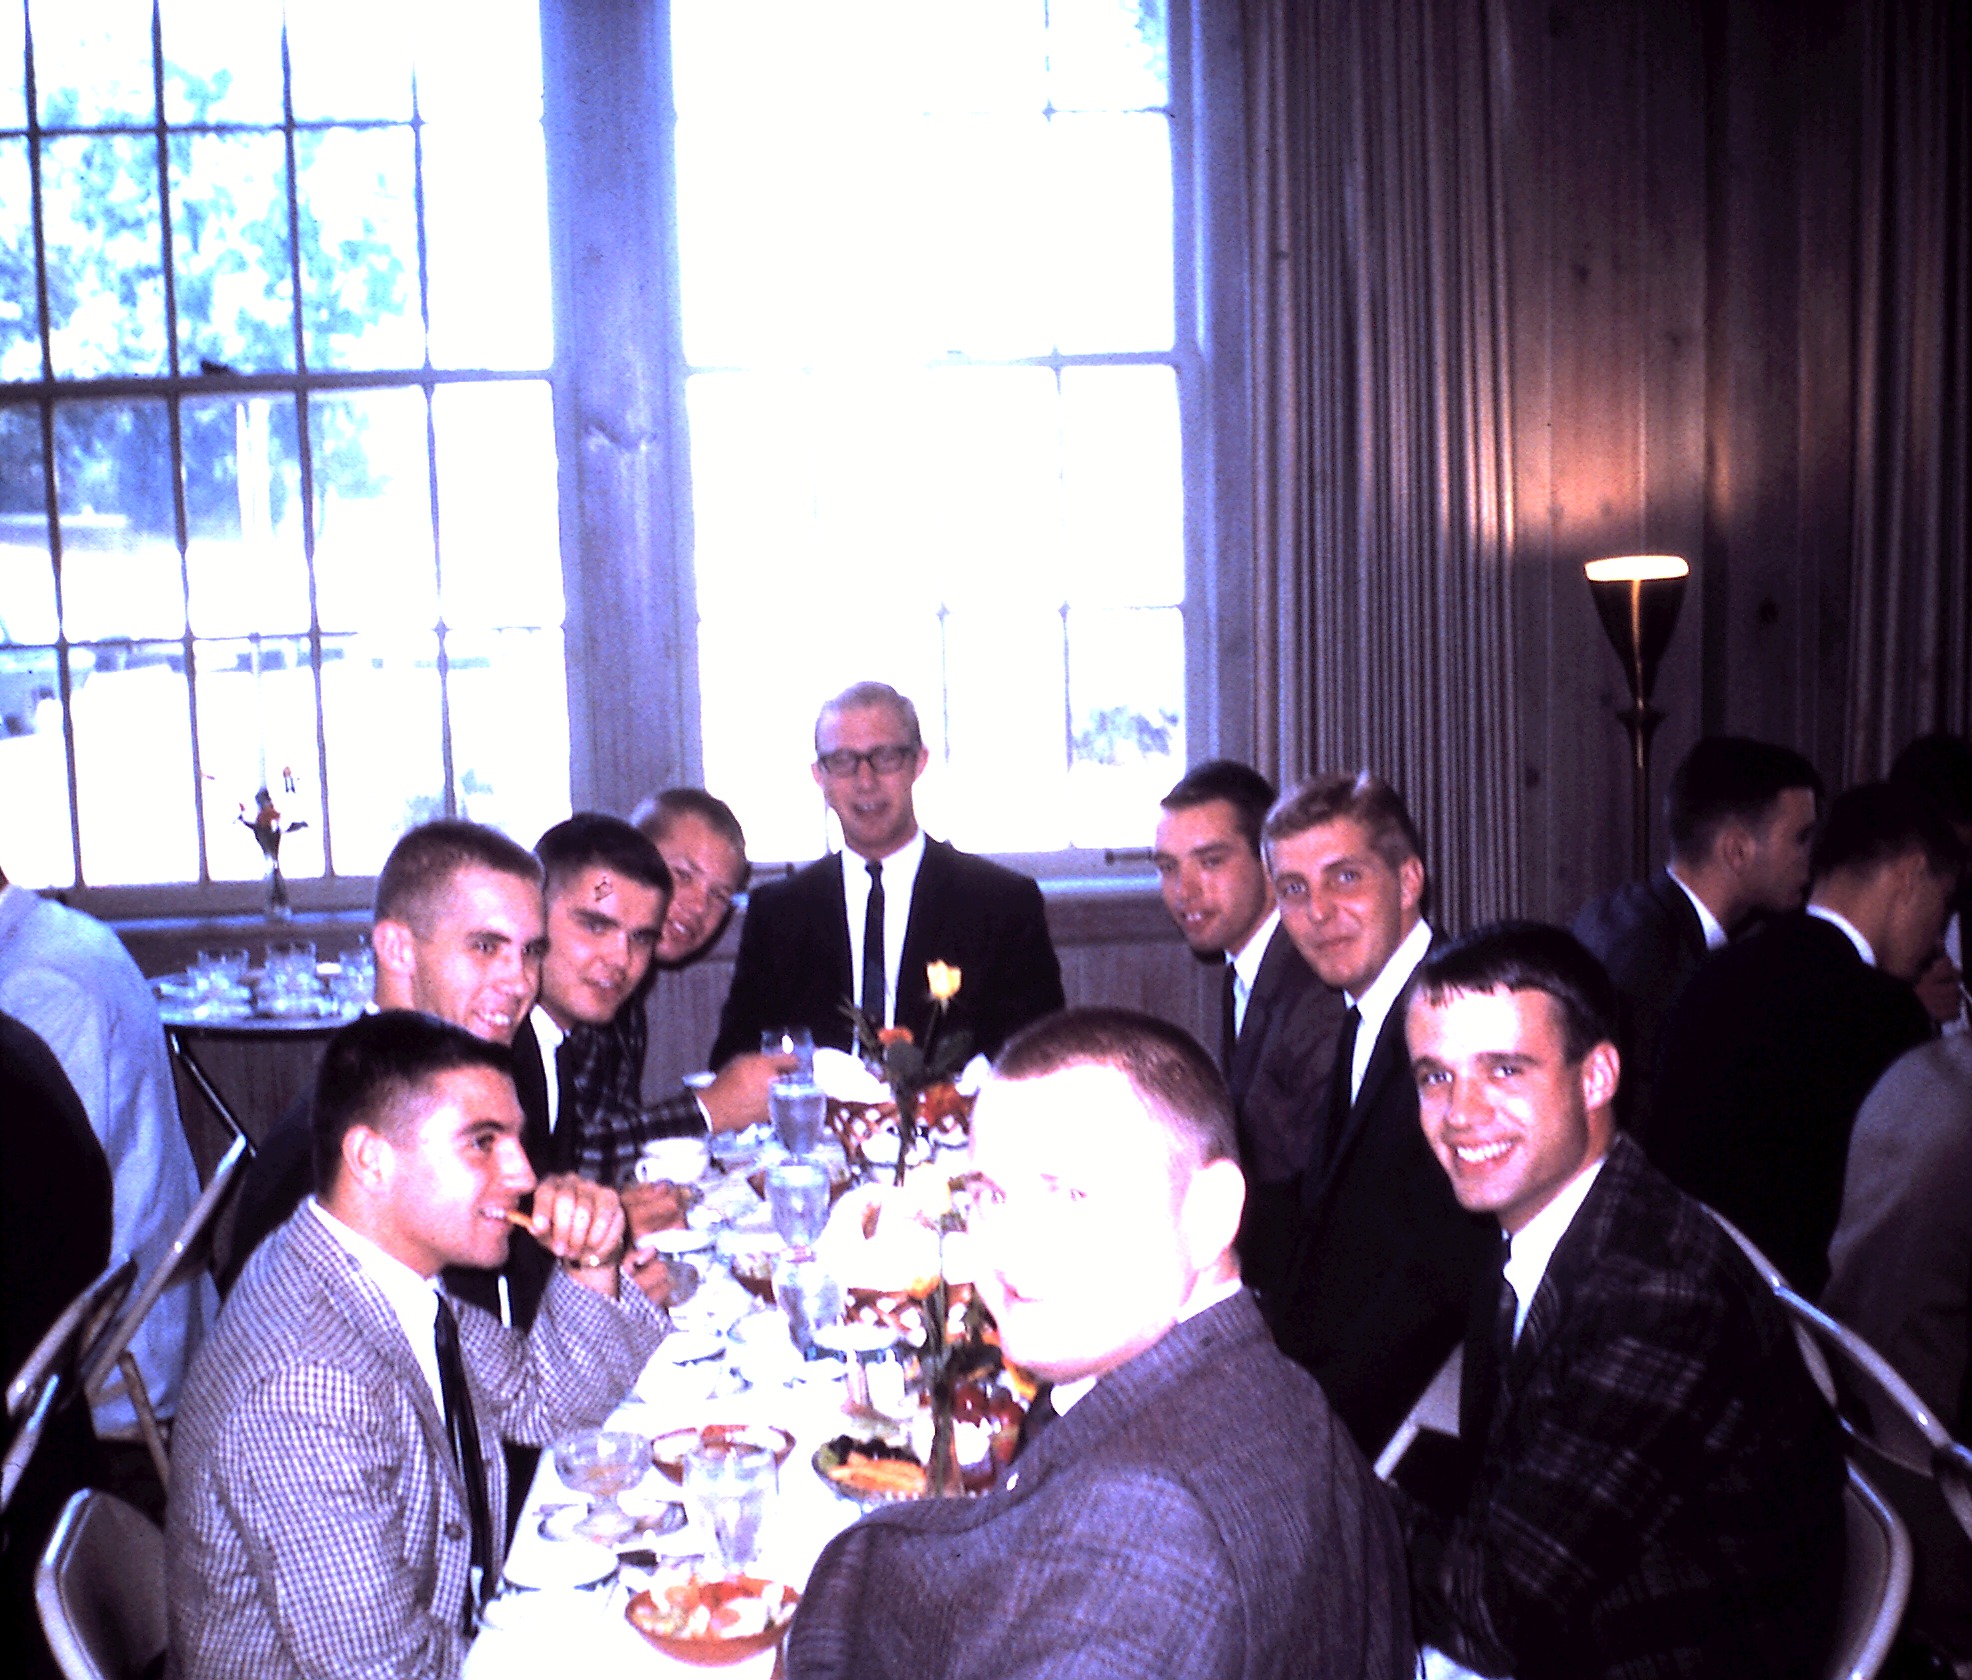  Sigma members at an Initiation banquet, 1963 